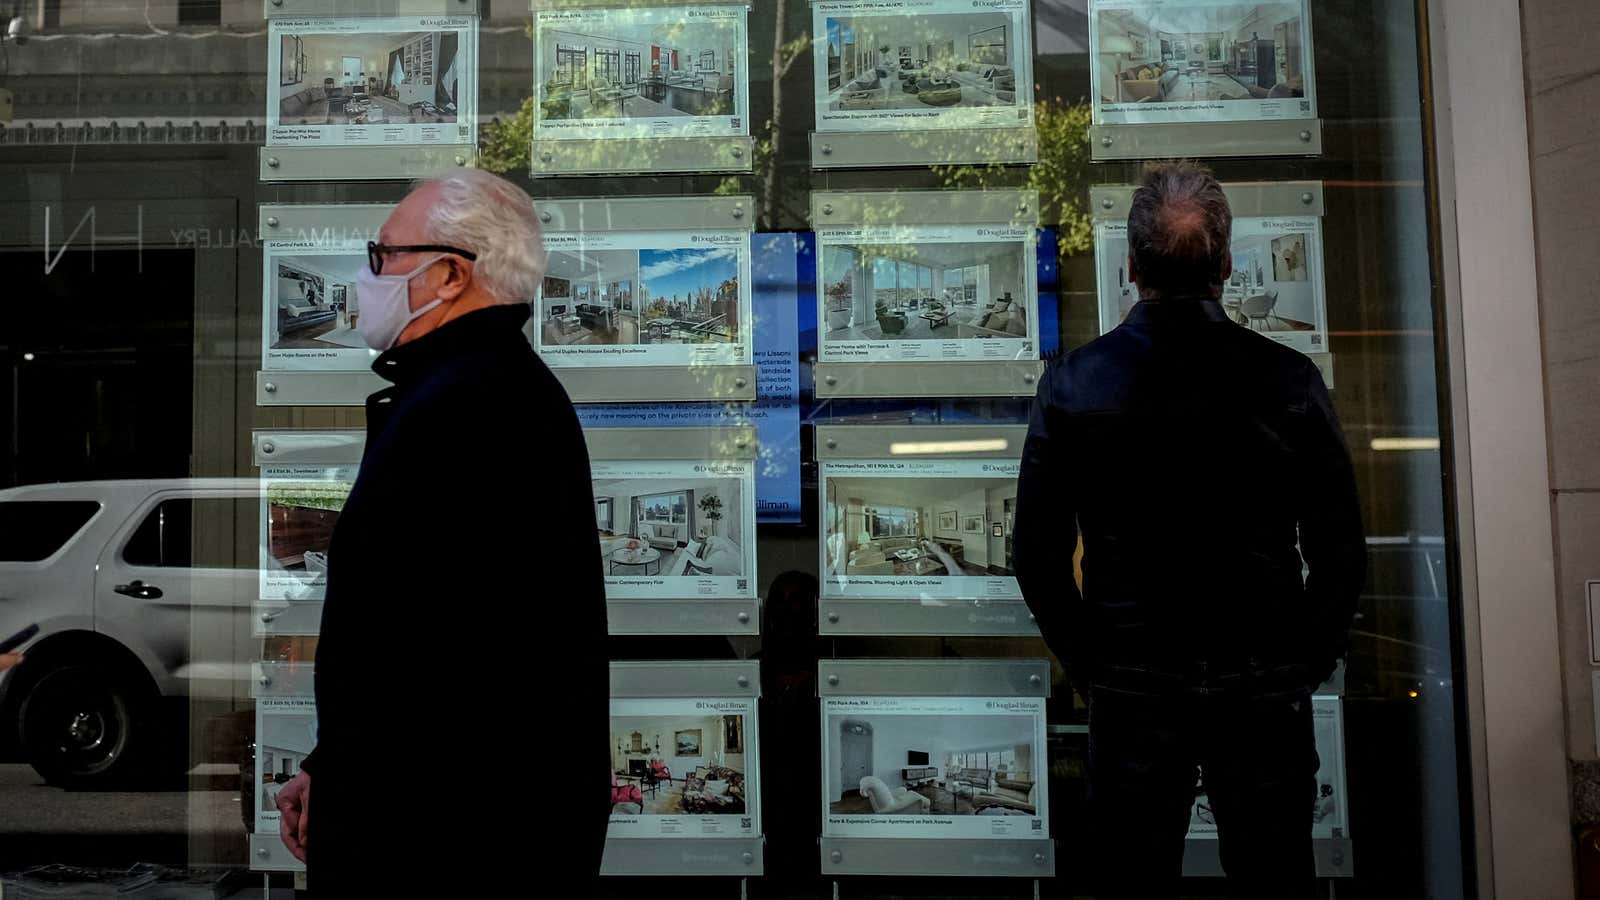 A man looks at advertisements for luxury apartments and homes in the window of a Douglas Elliman Real Estate sales business in Manhattanâ€™s upper east side neighborhood in New York City, New York, U.S. October 19, 2021.